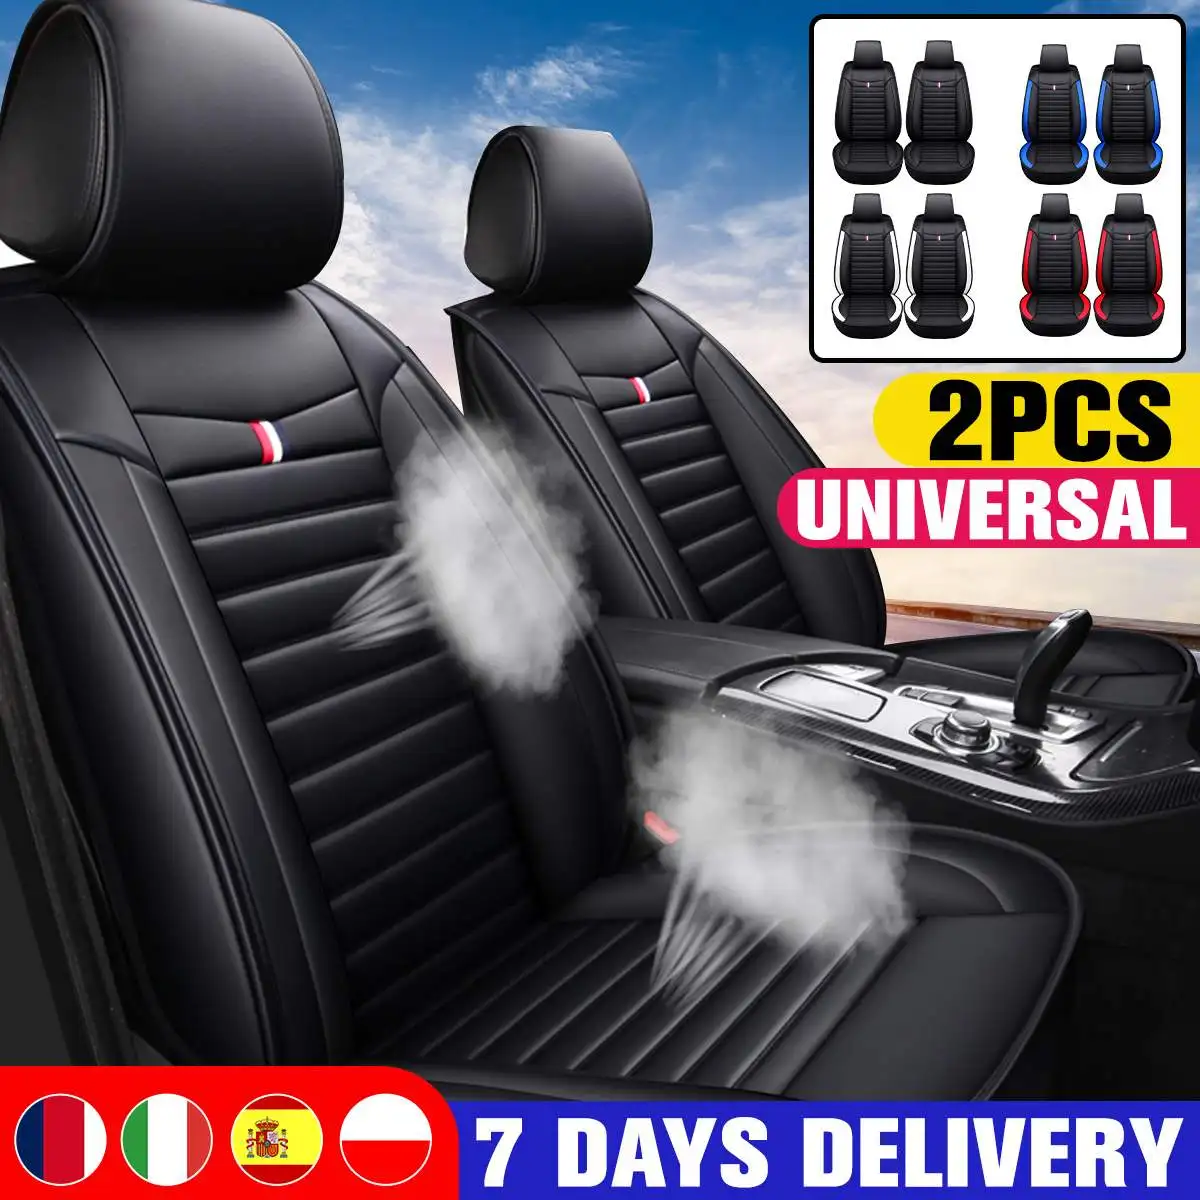 2pcs Universal Car Seat Covers Set Front Rear Seat Covers Leather Cushion Car Chair Seats Protector Mat Car Accessories 4 Season